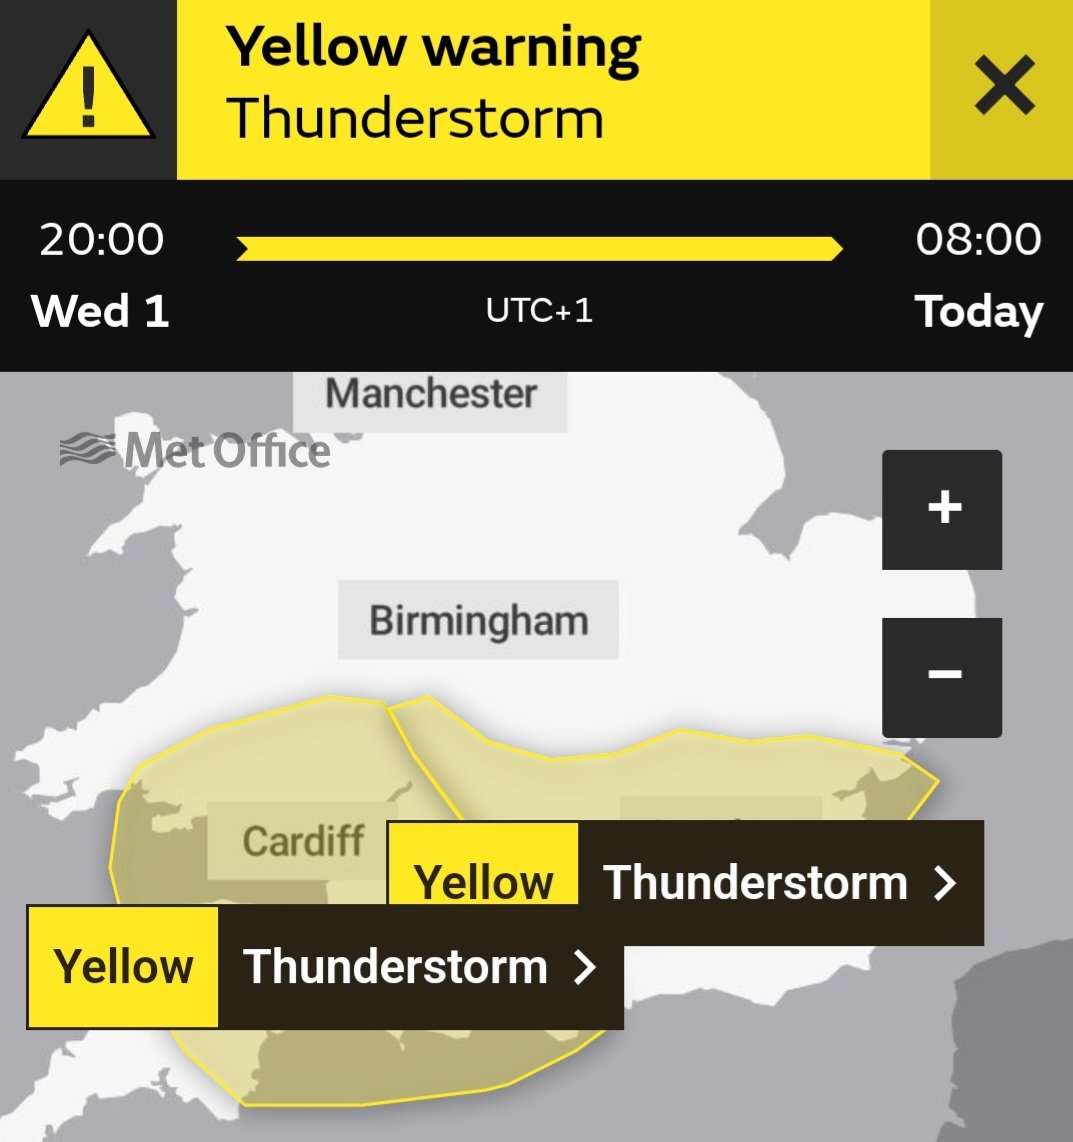 Guessing the yellow warning was a touch underestimated for lightning in London last night? 😱 
#Thunderstorms #Lightning #MetOffice #BBCLondon #Weather #TMYC #Thames #Molesey #HamptonCourt #BankHoliday #Cruise #Boating #Boats